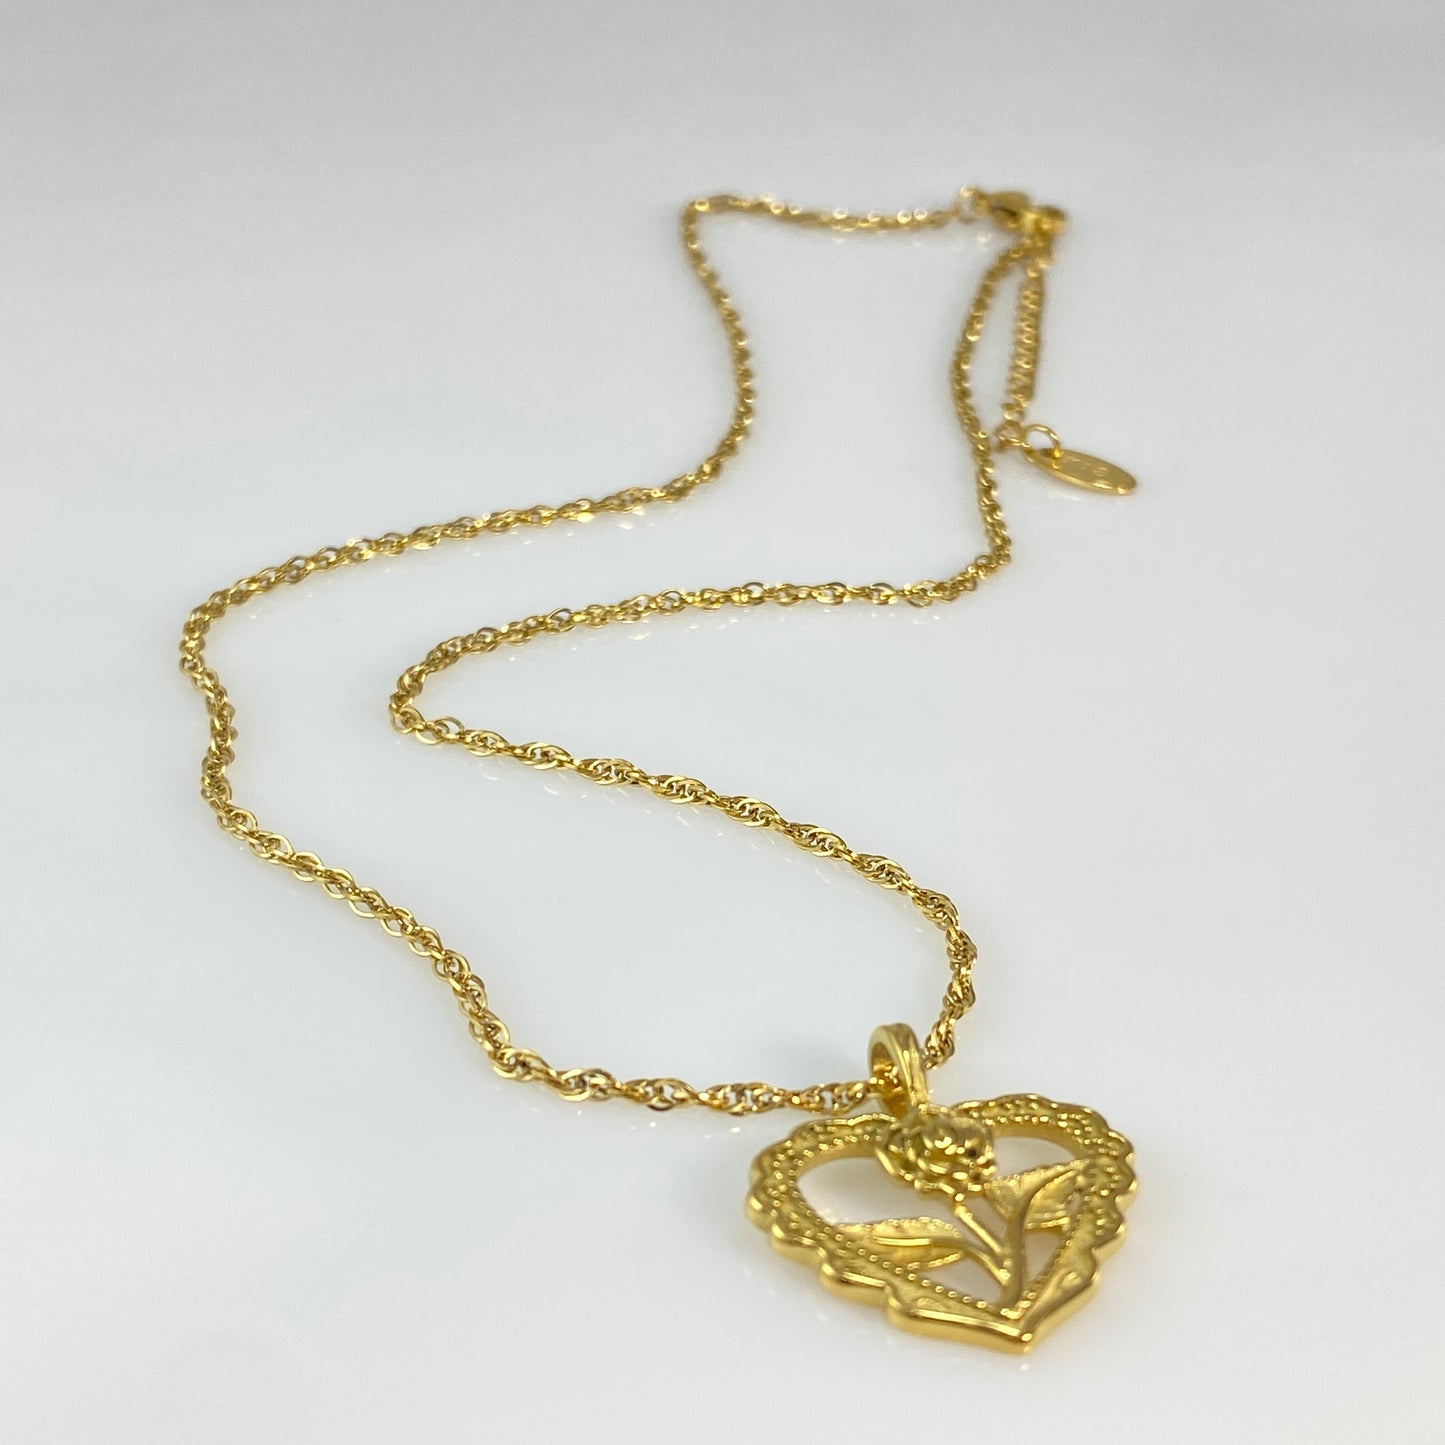 18 kt Gold Plated Heart Pendant on Stainless Steel Twisted Singapore Chain Necklace